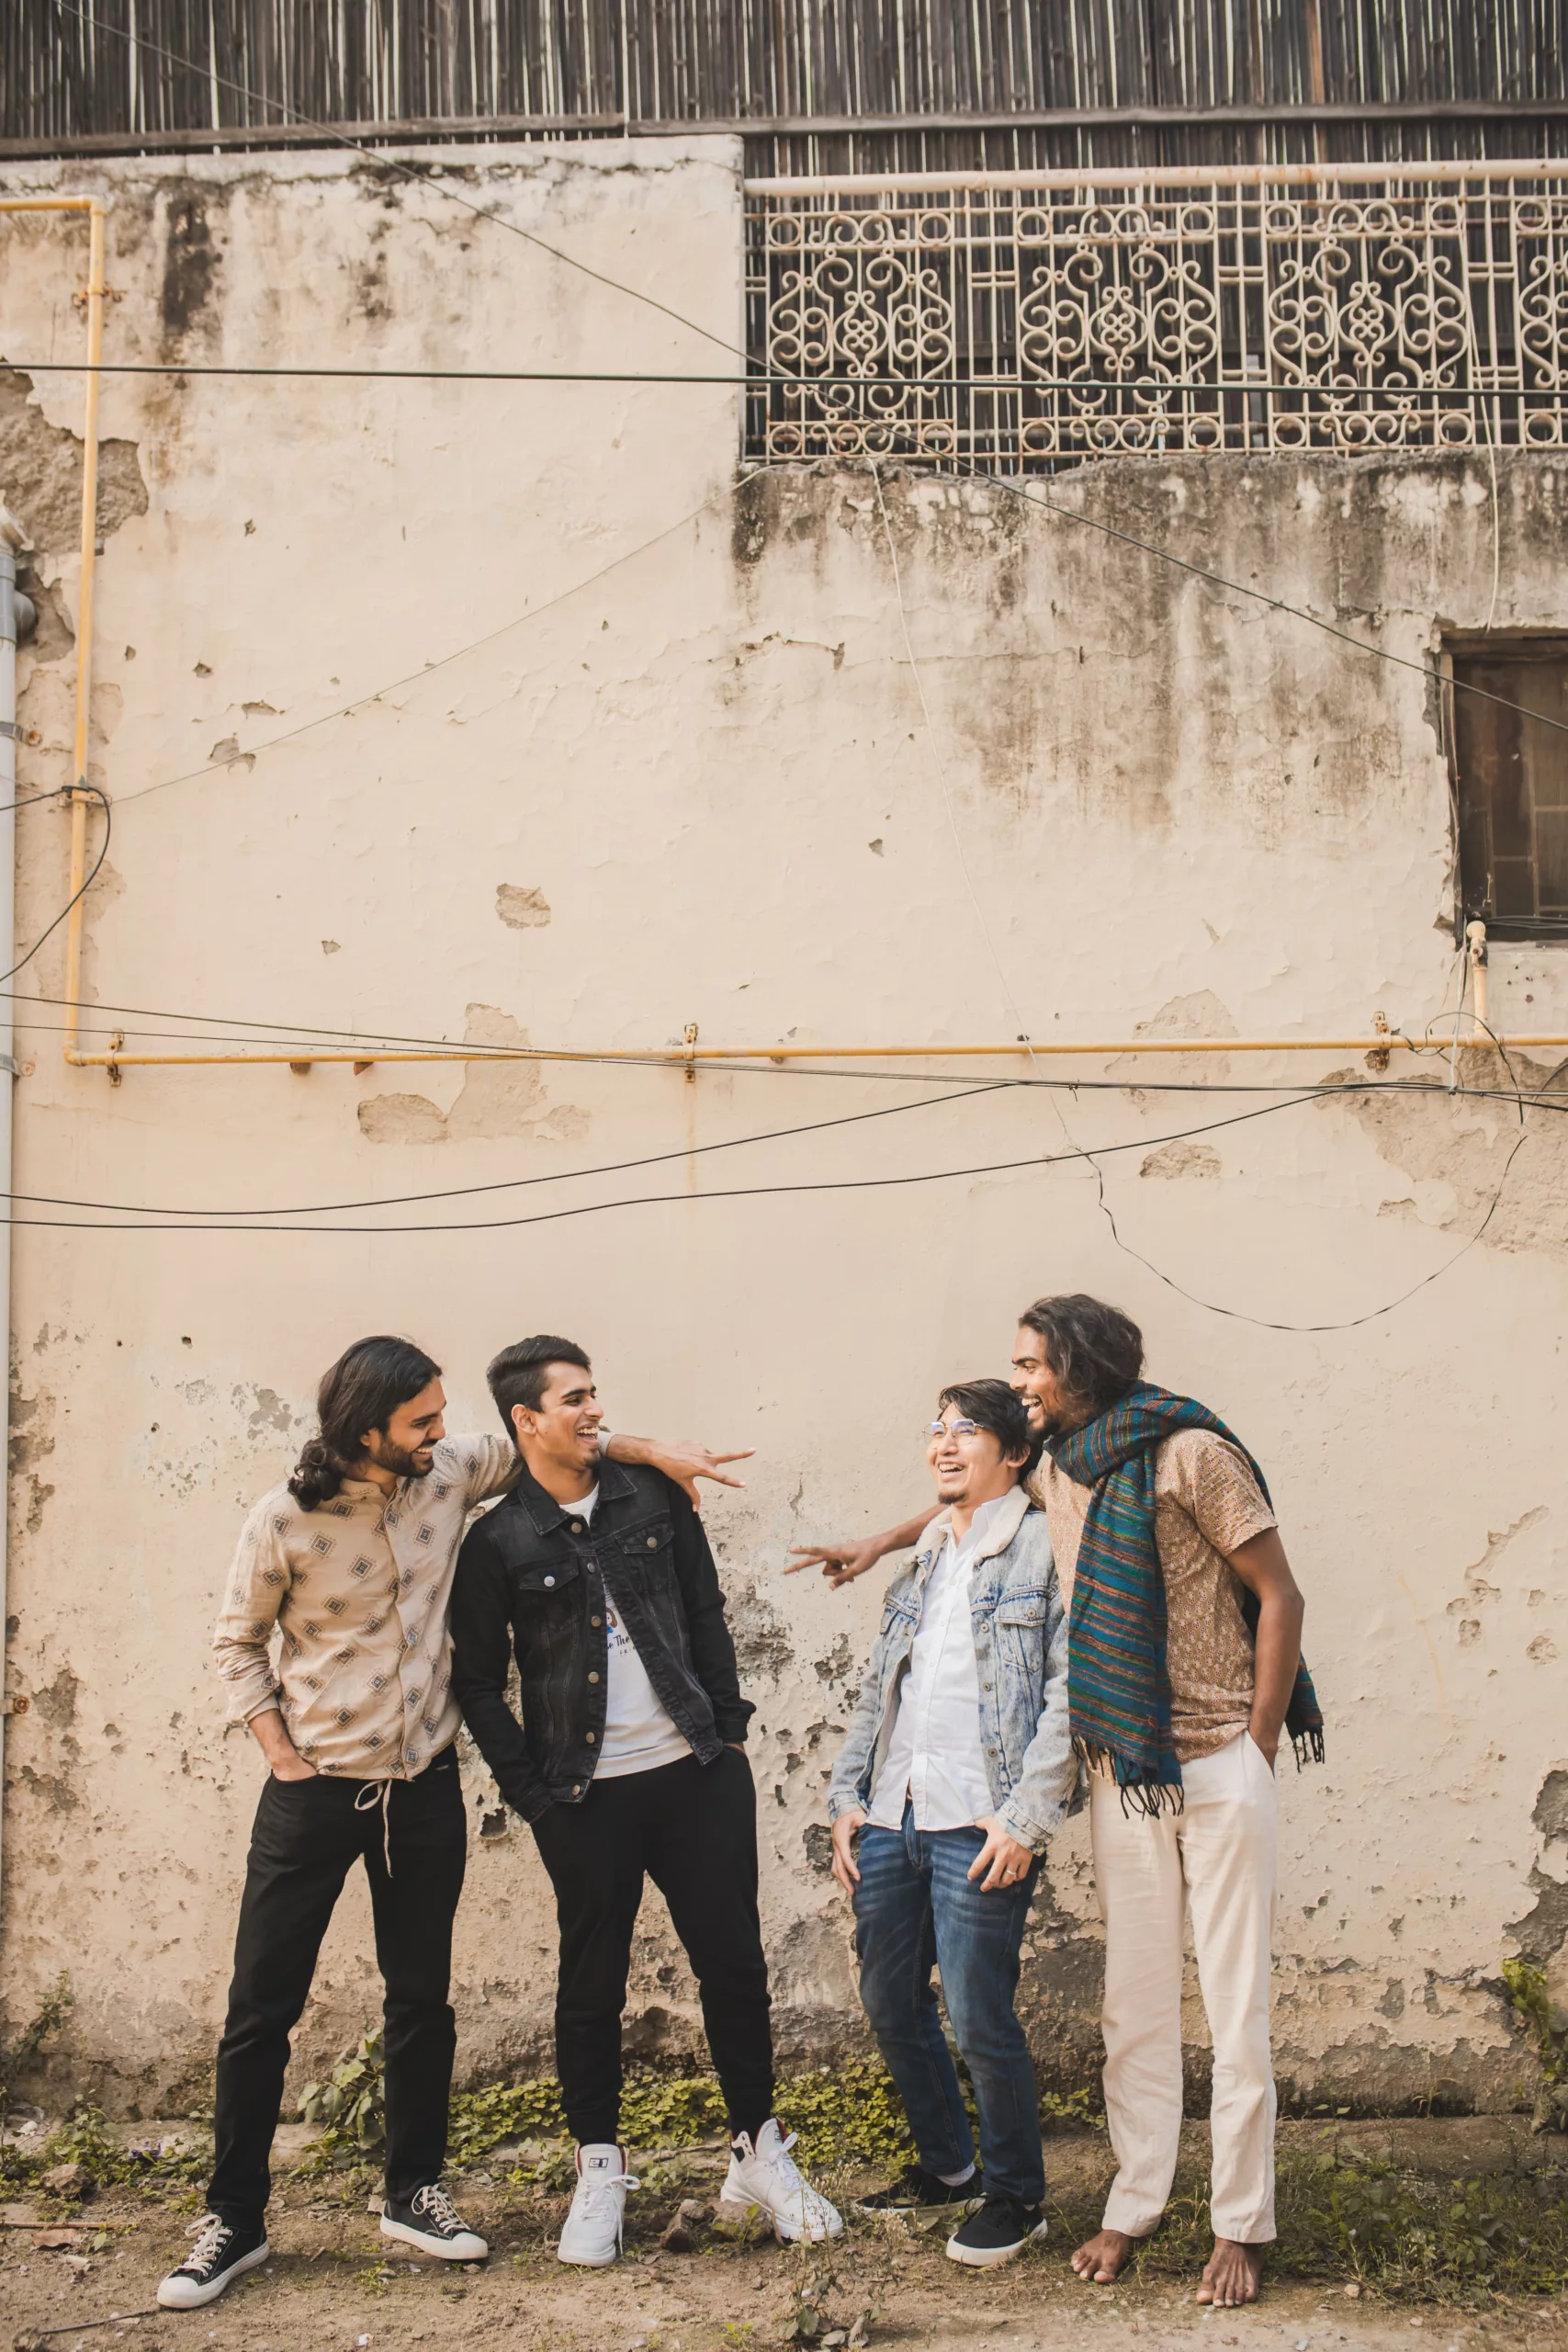 The Artic Tern’s latest single “Beparwah” is your ticket to live carefree and cherish life.